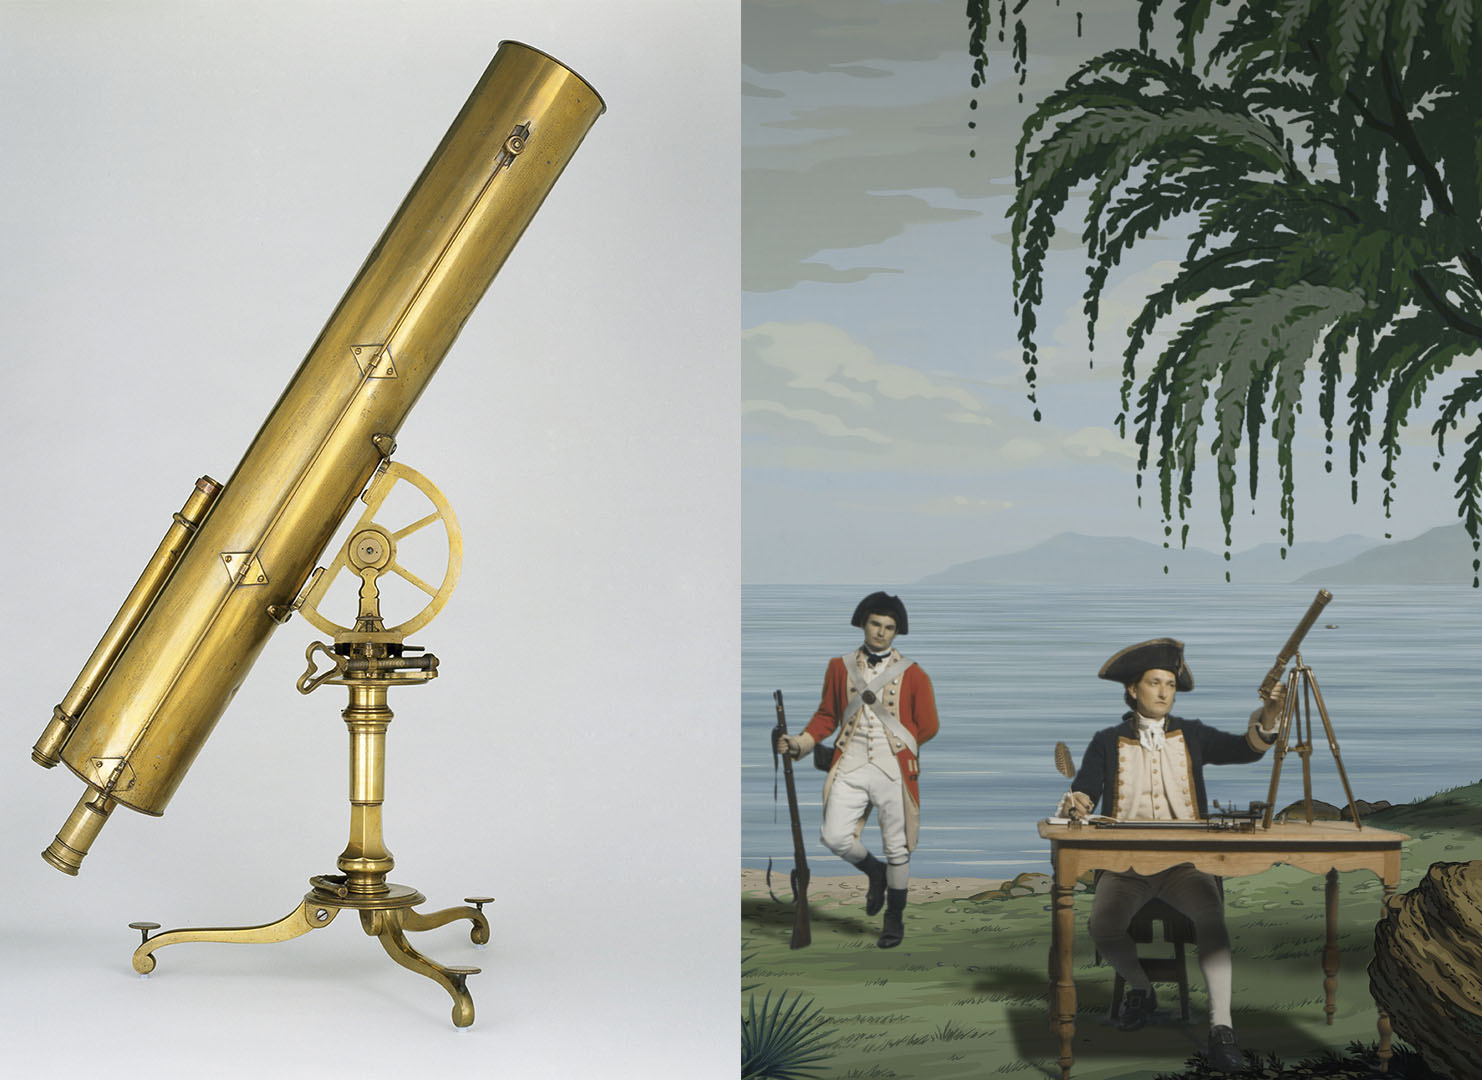 On the left, a brass telescope from the 1700s, on the right, in a still from in Pursuit of Venus [infected], a man playing James Cook sits at his desk writing, while looking at his telescope